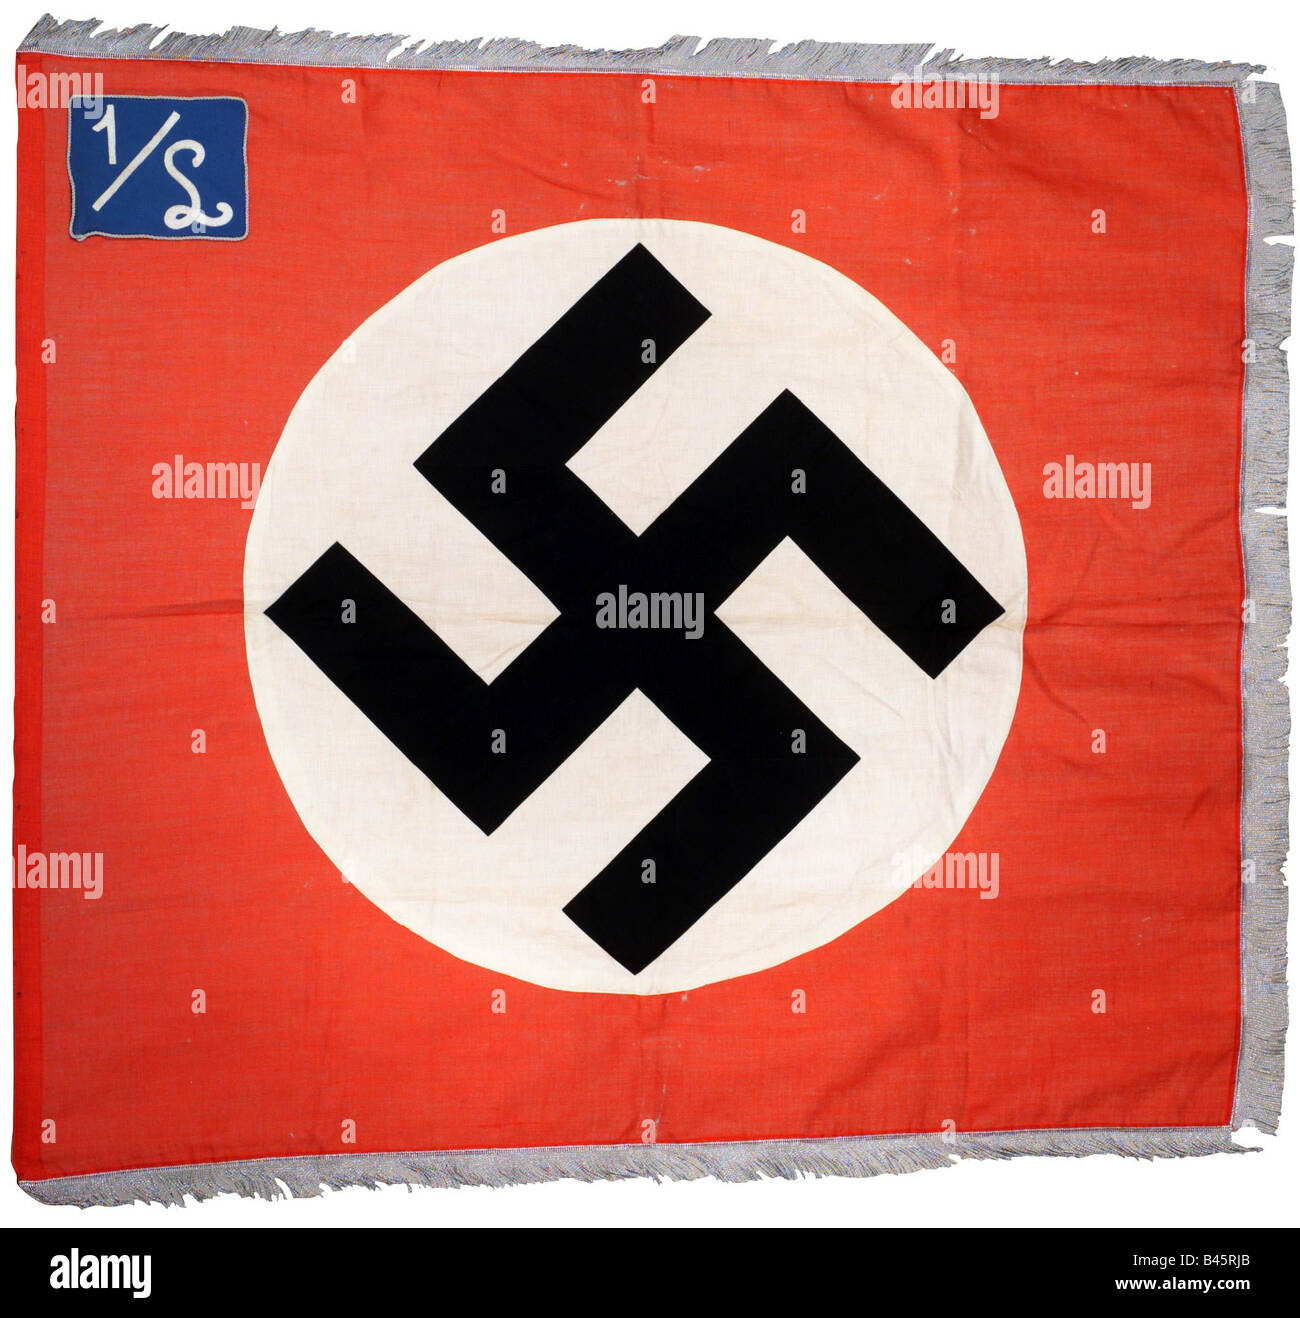 Sturmabteilung Flag High Resolution Stock Photography and Images - Alamy